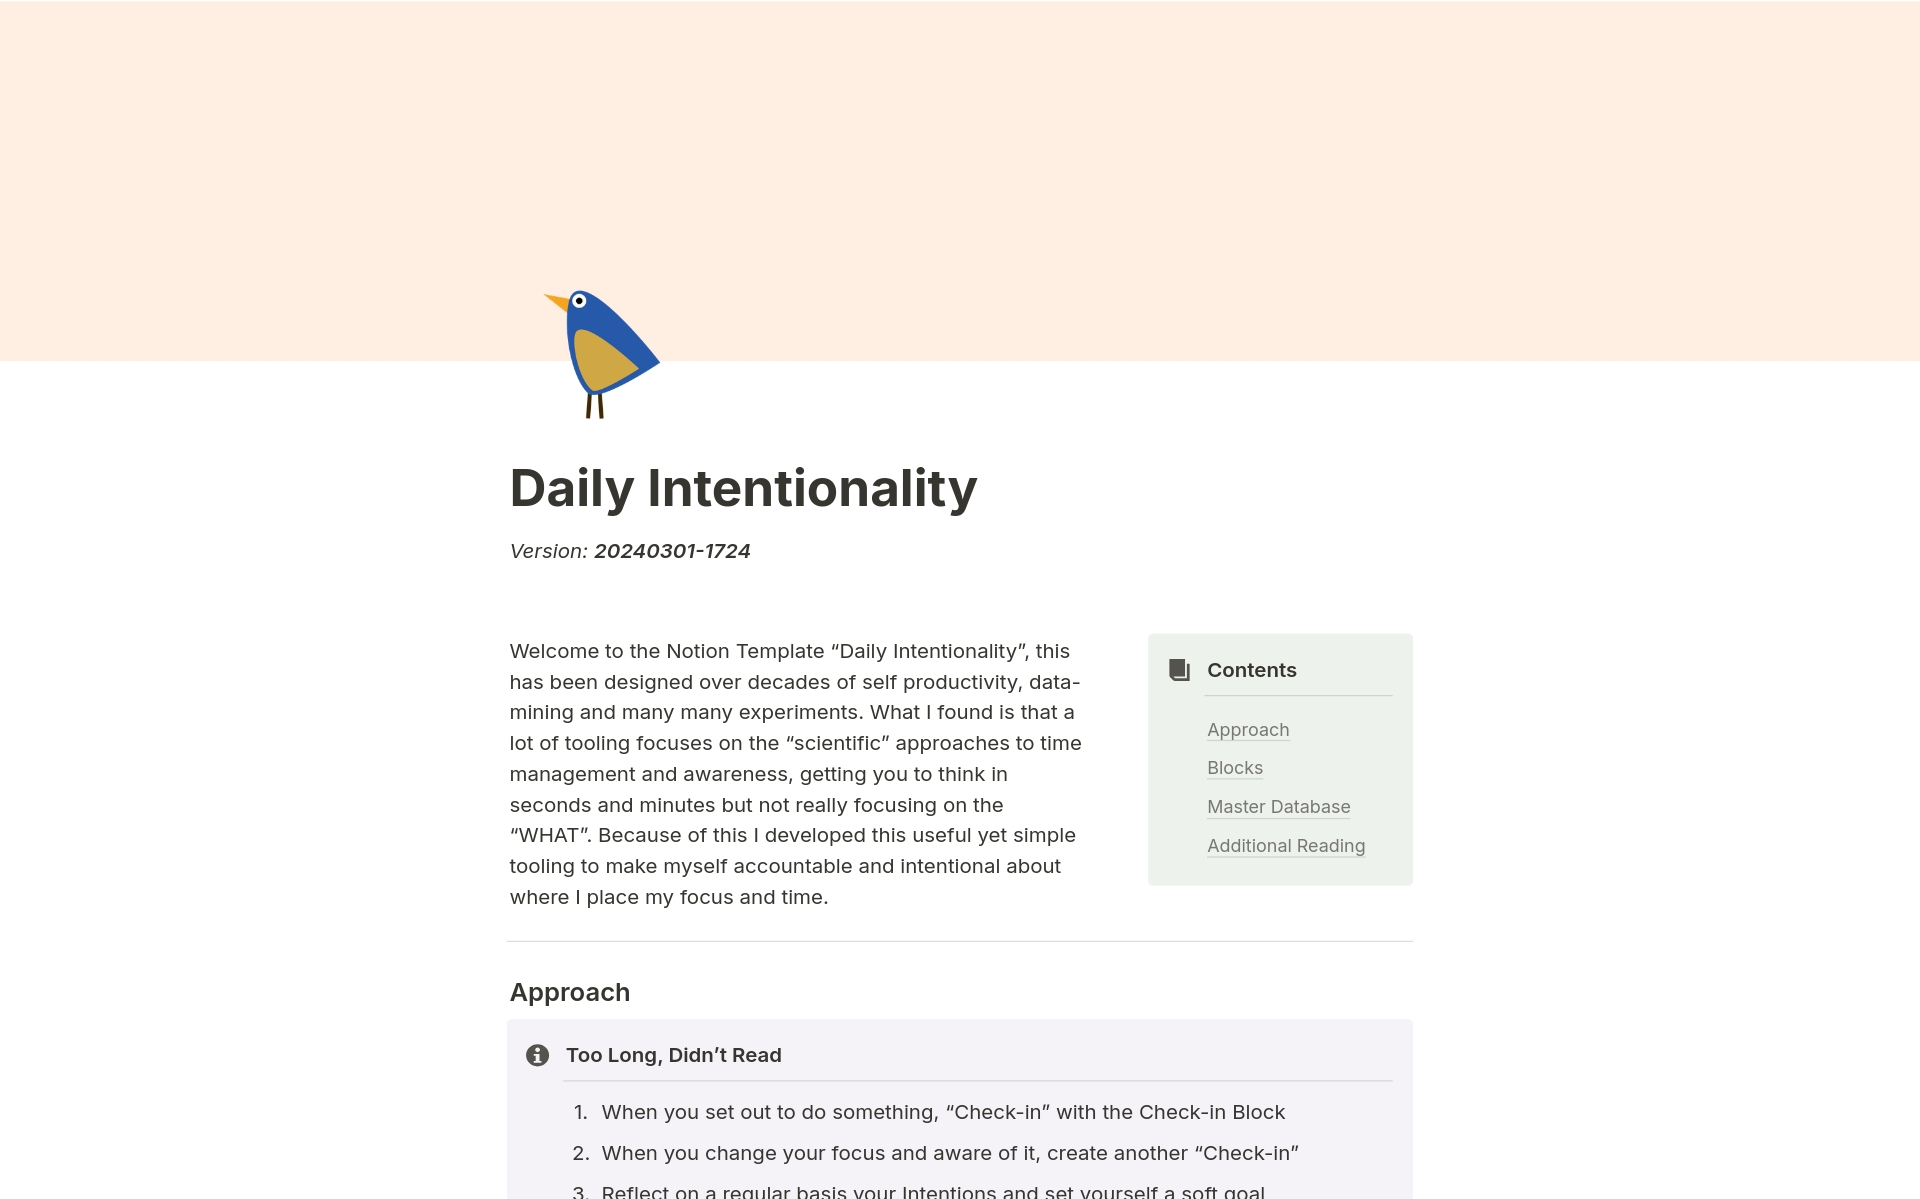 Introducing the 'Daily Intentionality' Notion Template, crafted from years of self-productivity exploration. Unlike conventional tools, it prioritises 'WHAT' over minutes and seconds, fostering accountability and intentional focus. Simplify your time management journey now!